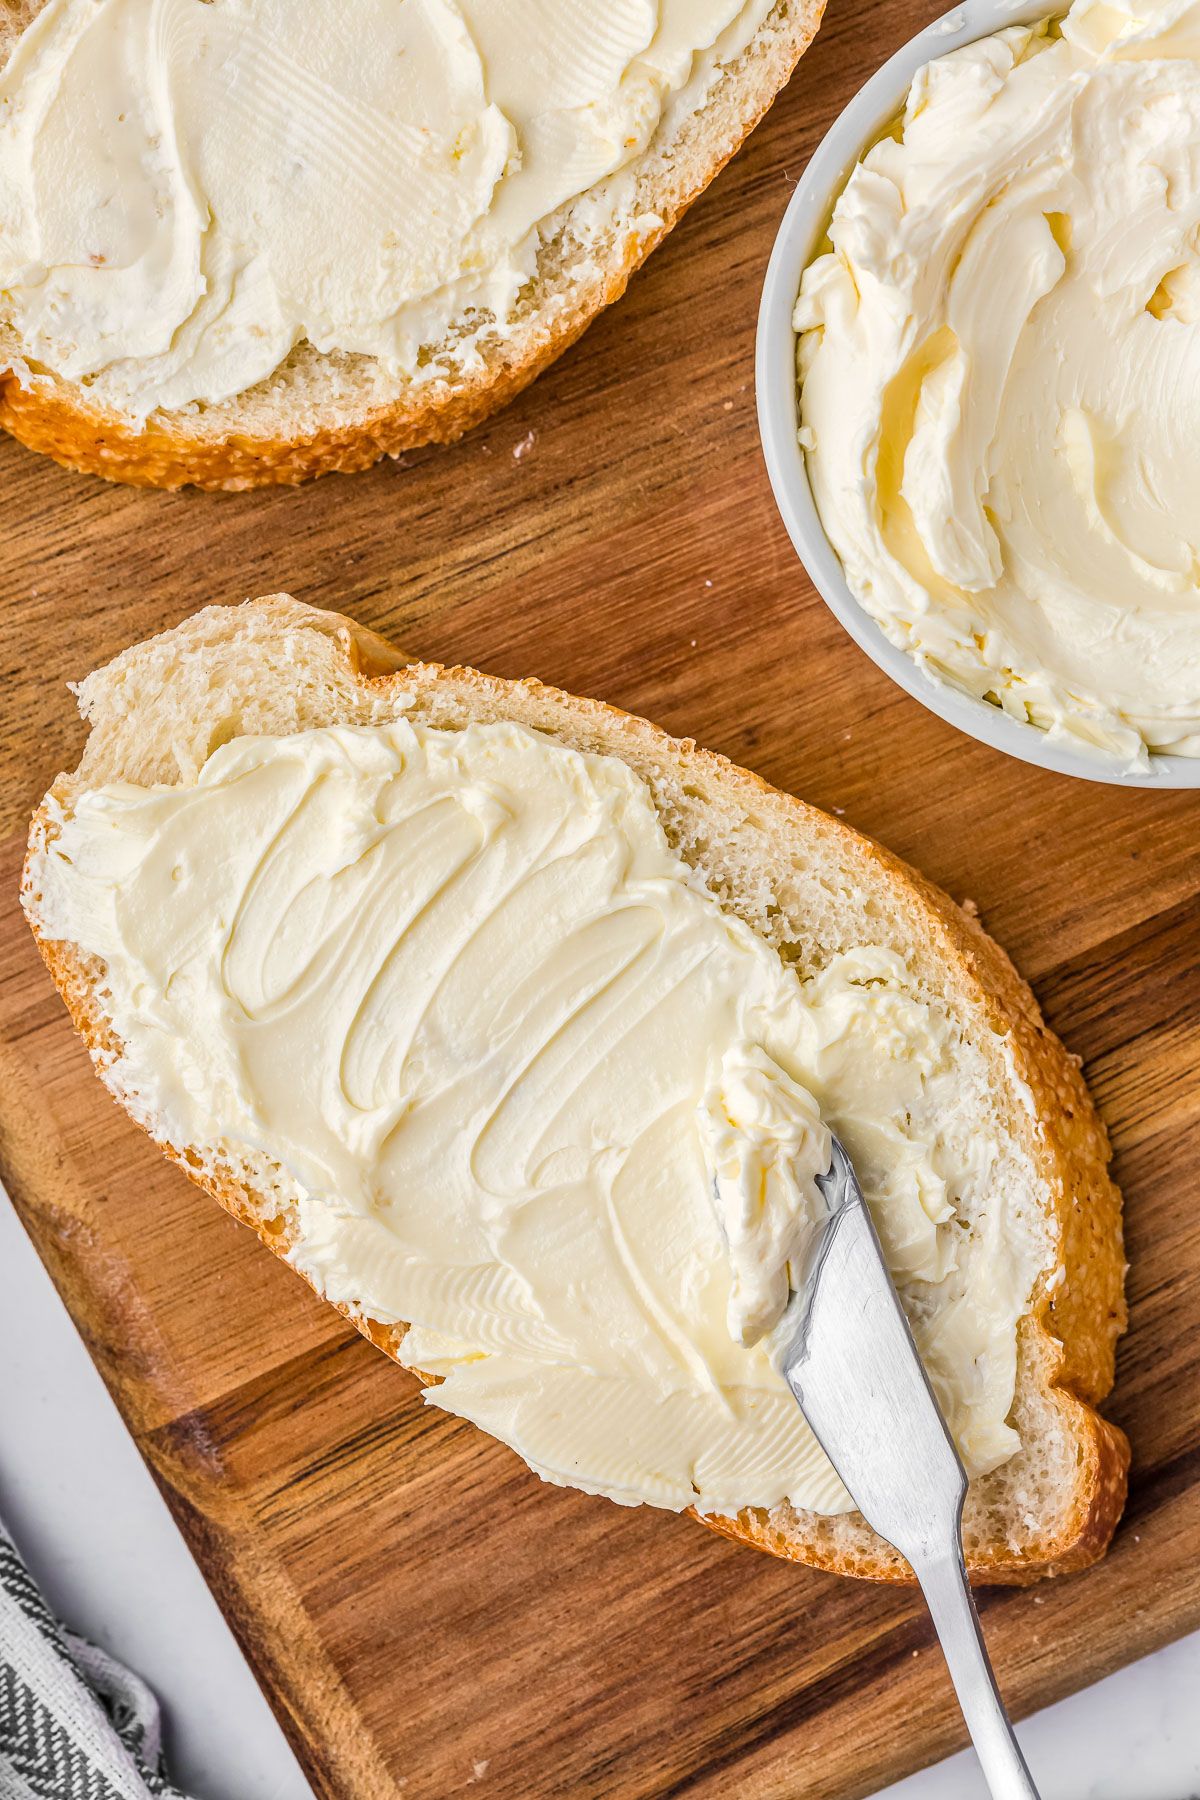 Spreading fresh butter on a slice of French bread with a butter knife.